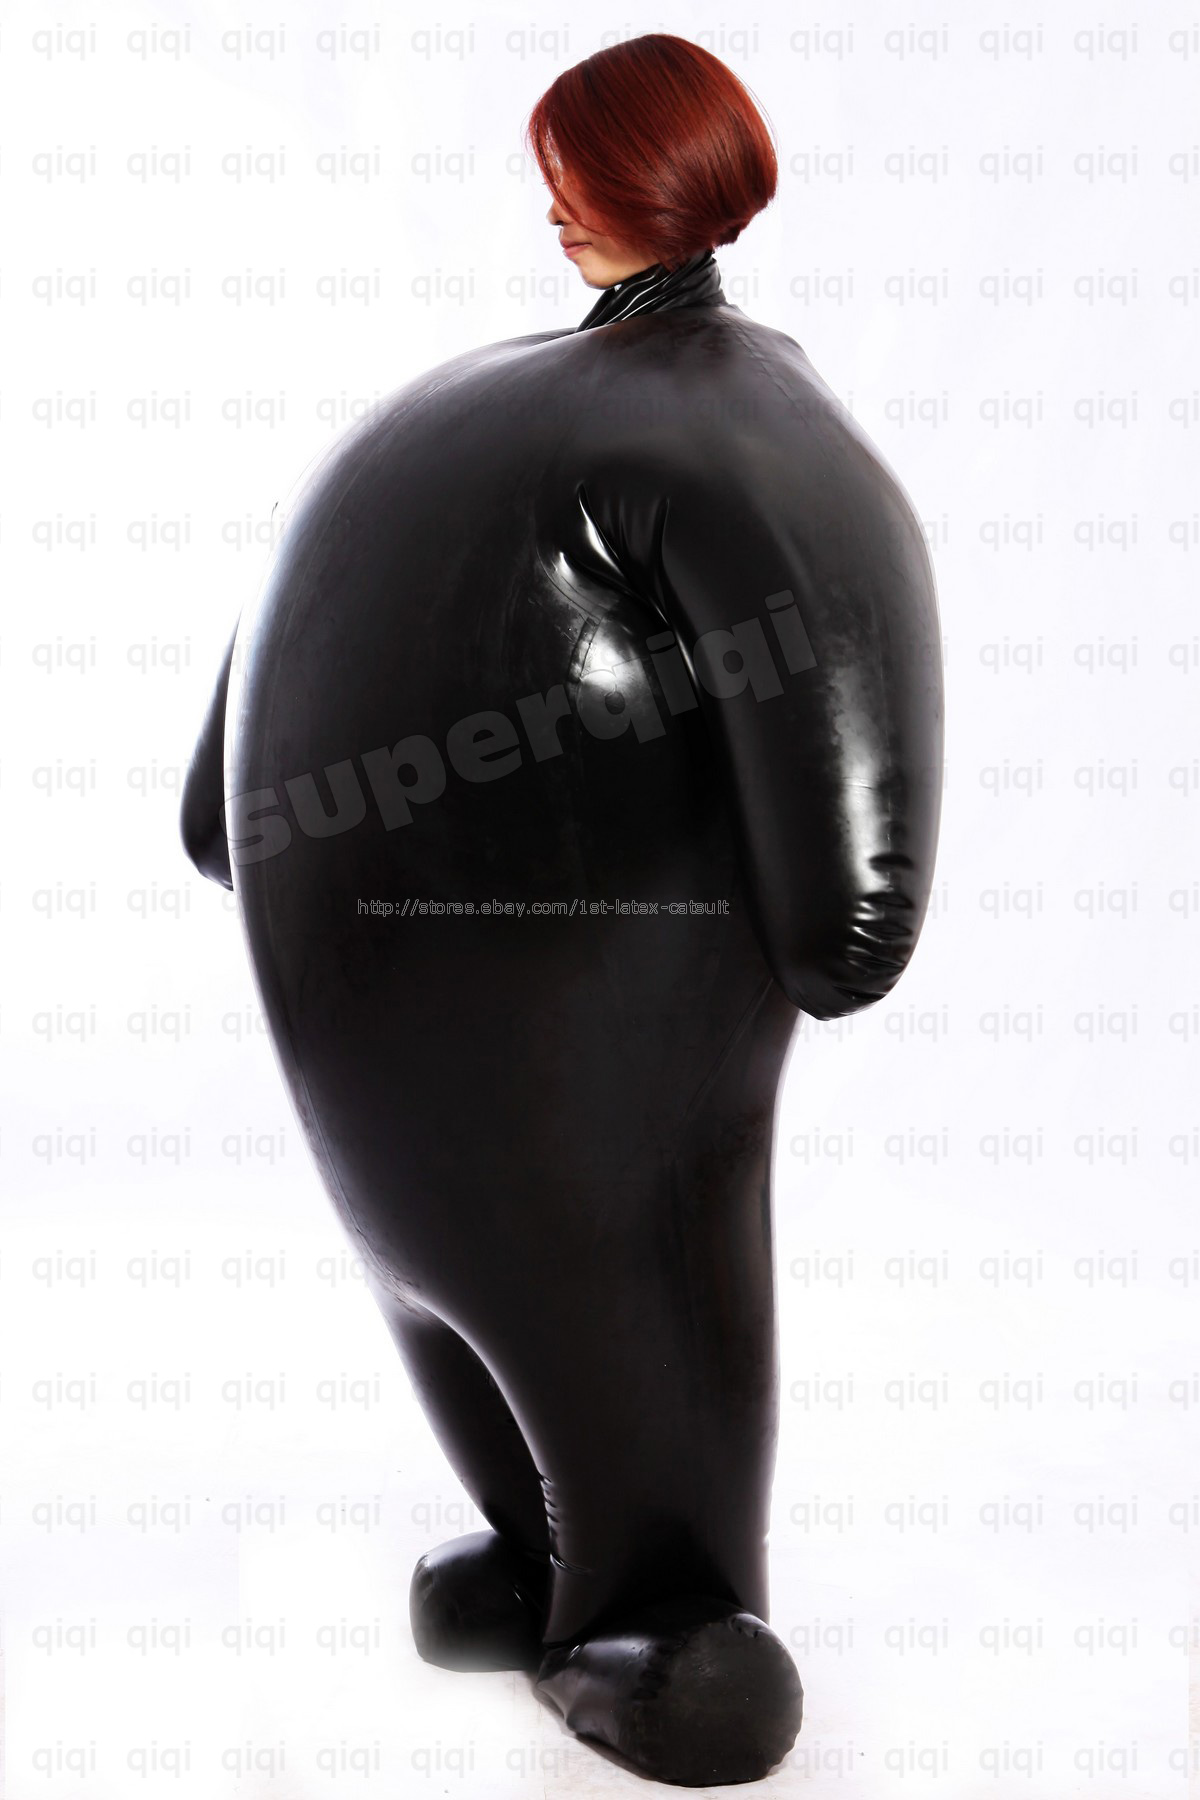 clothing Inflatable latex.